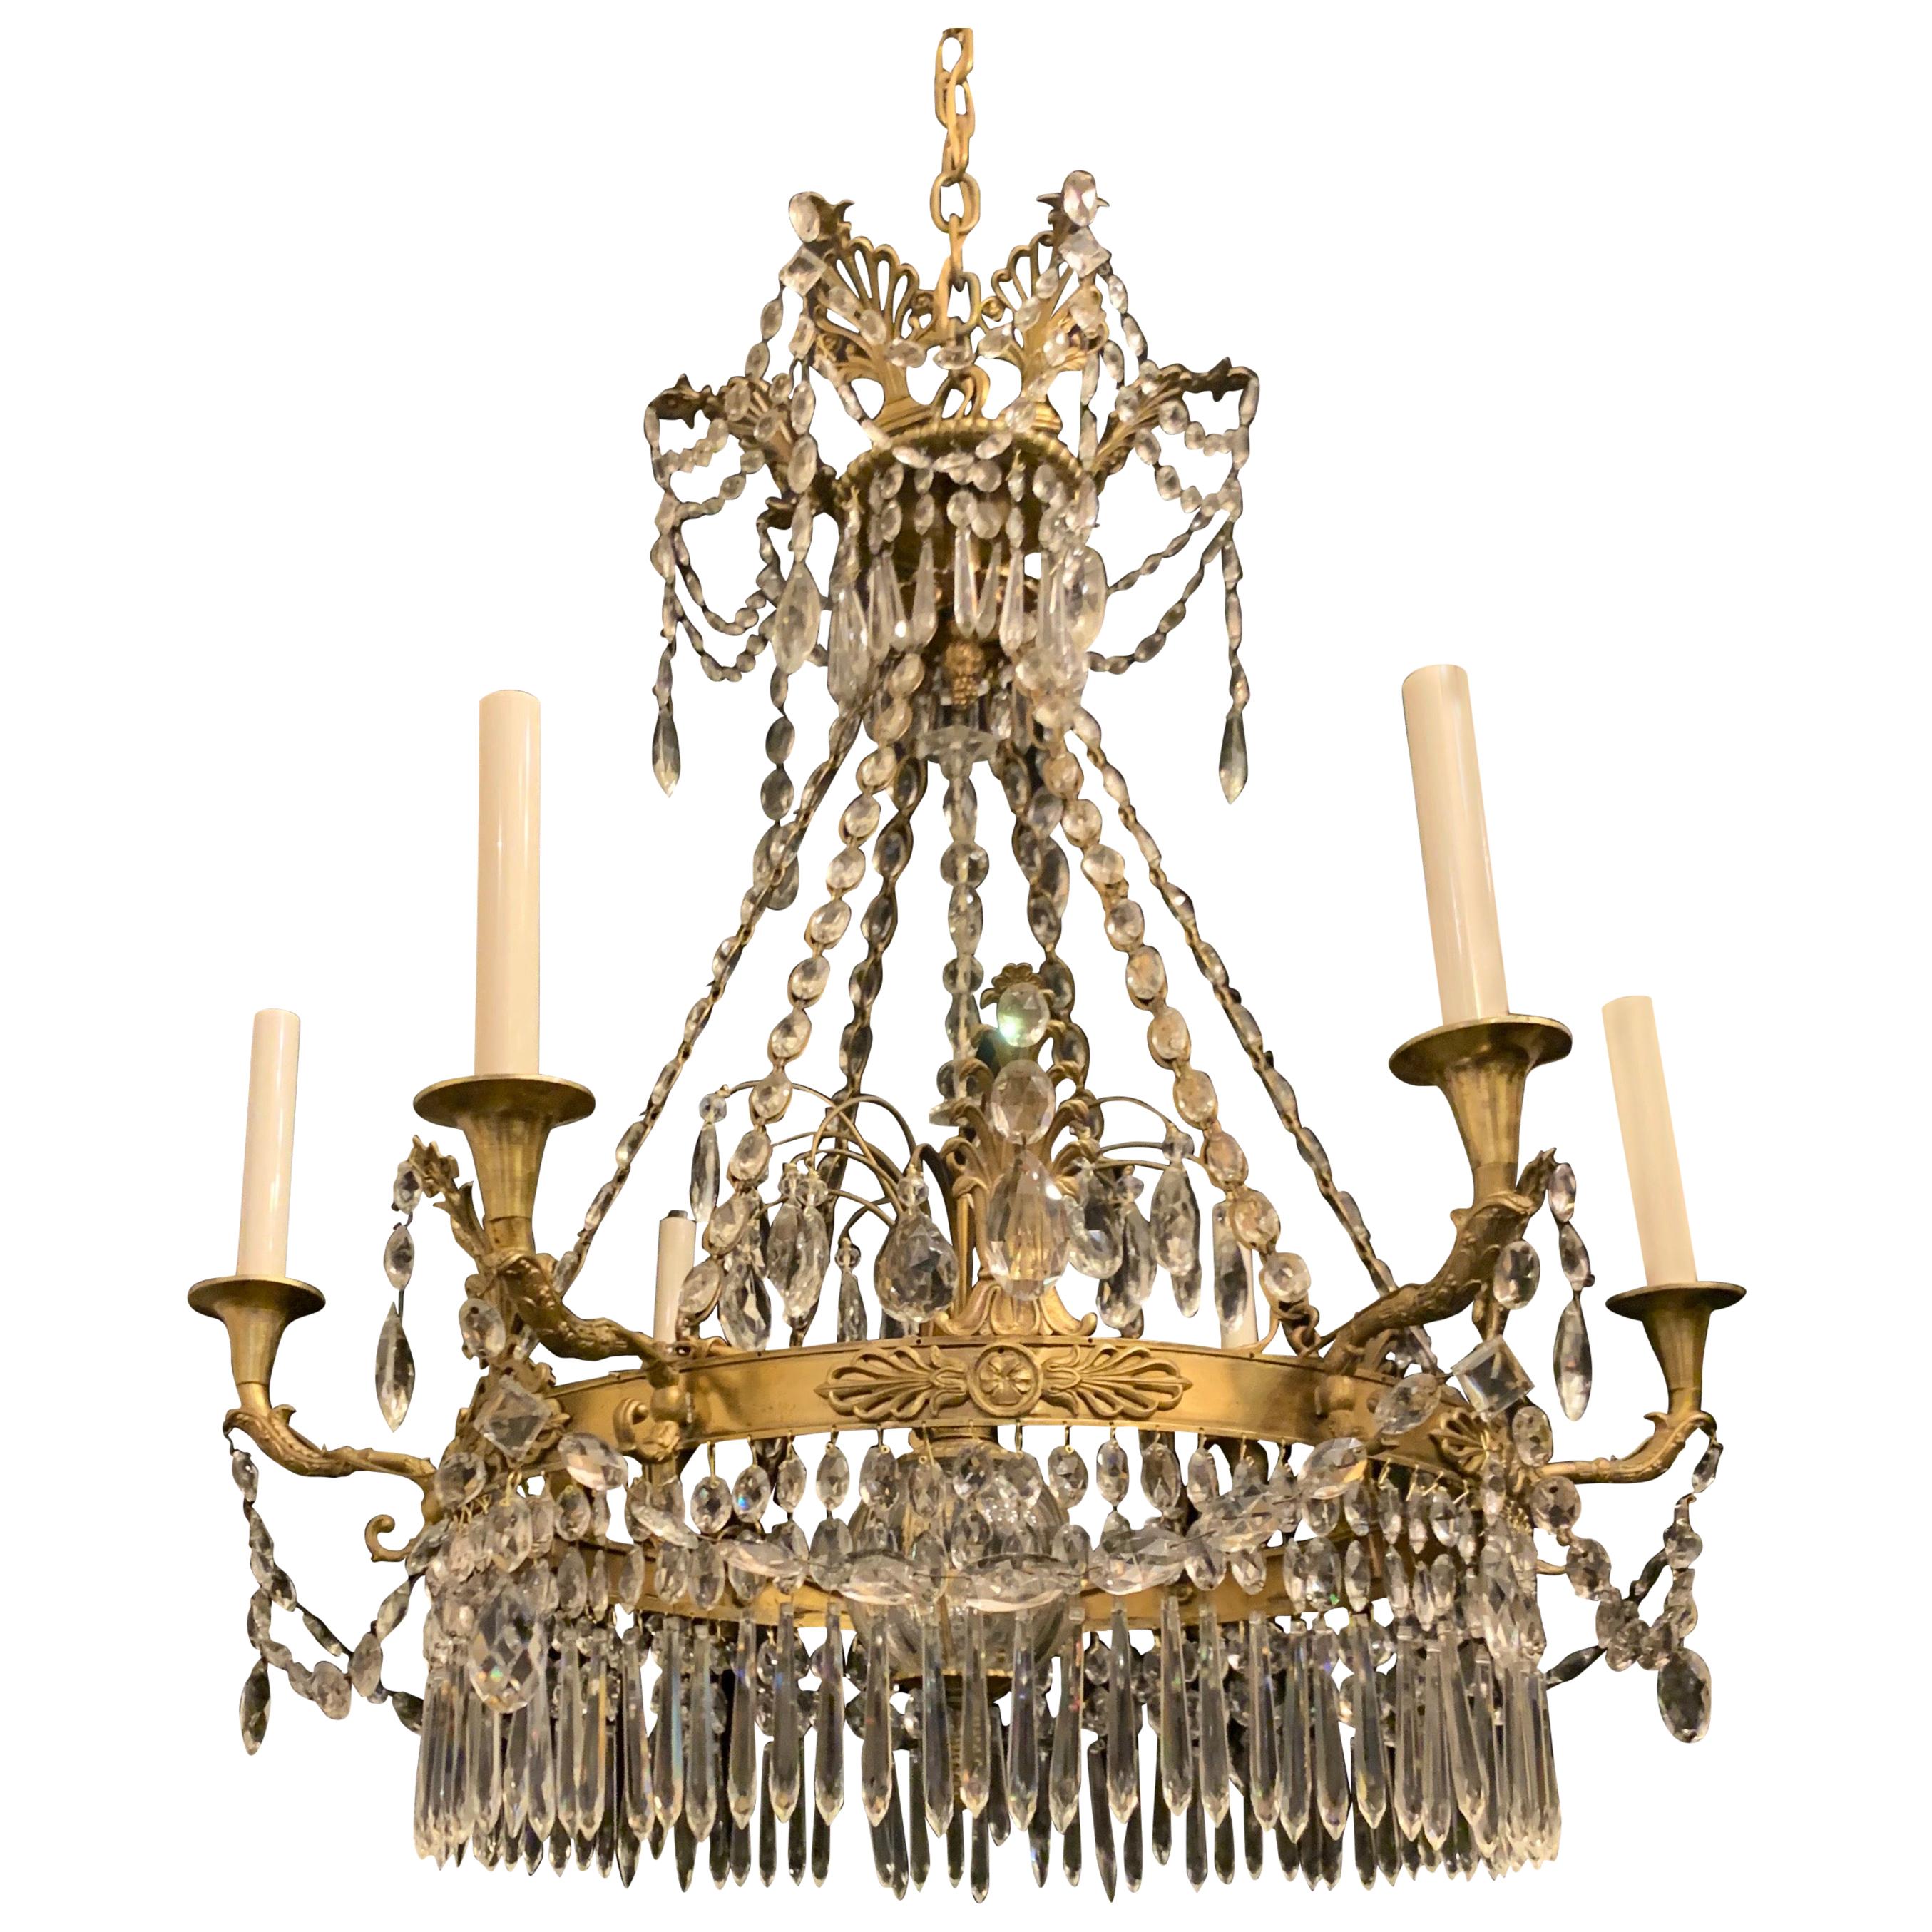 Wonderful Empire Neoclassical Bronze Crystal Swag Regency Baltic Chandelier For Sale